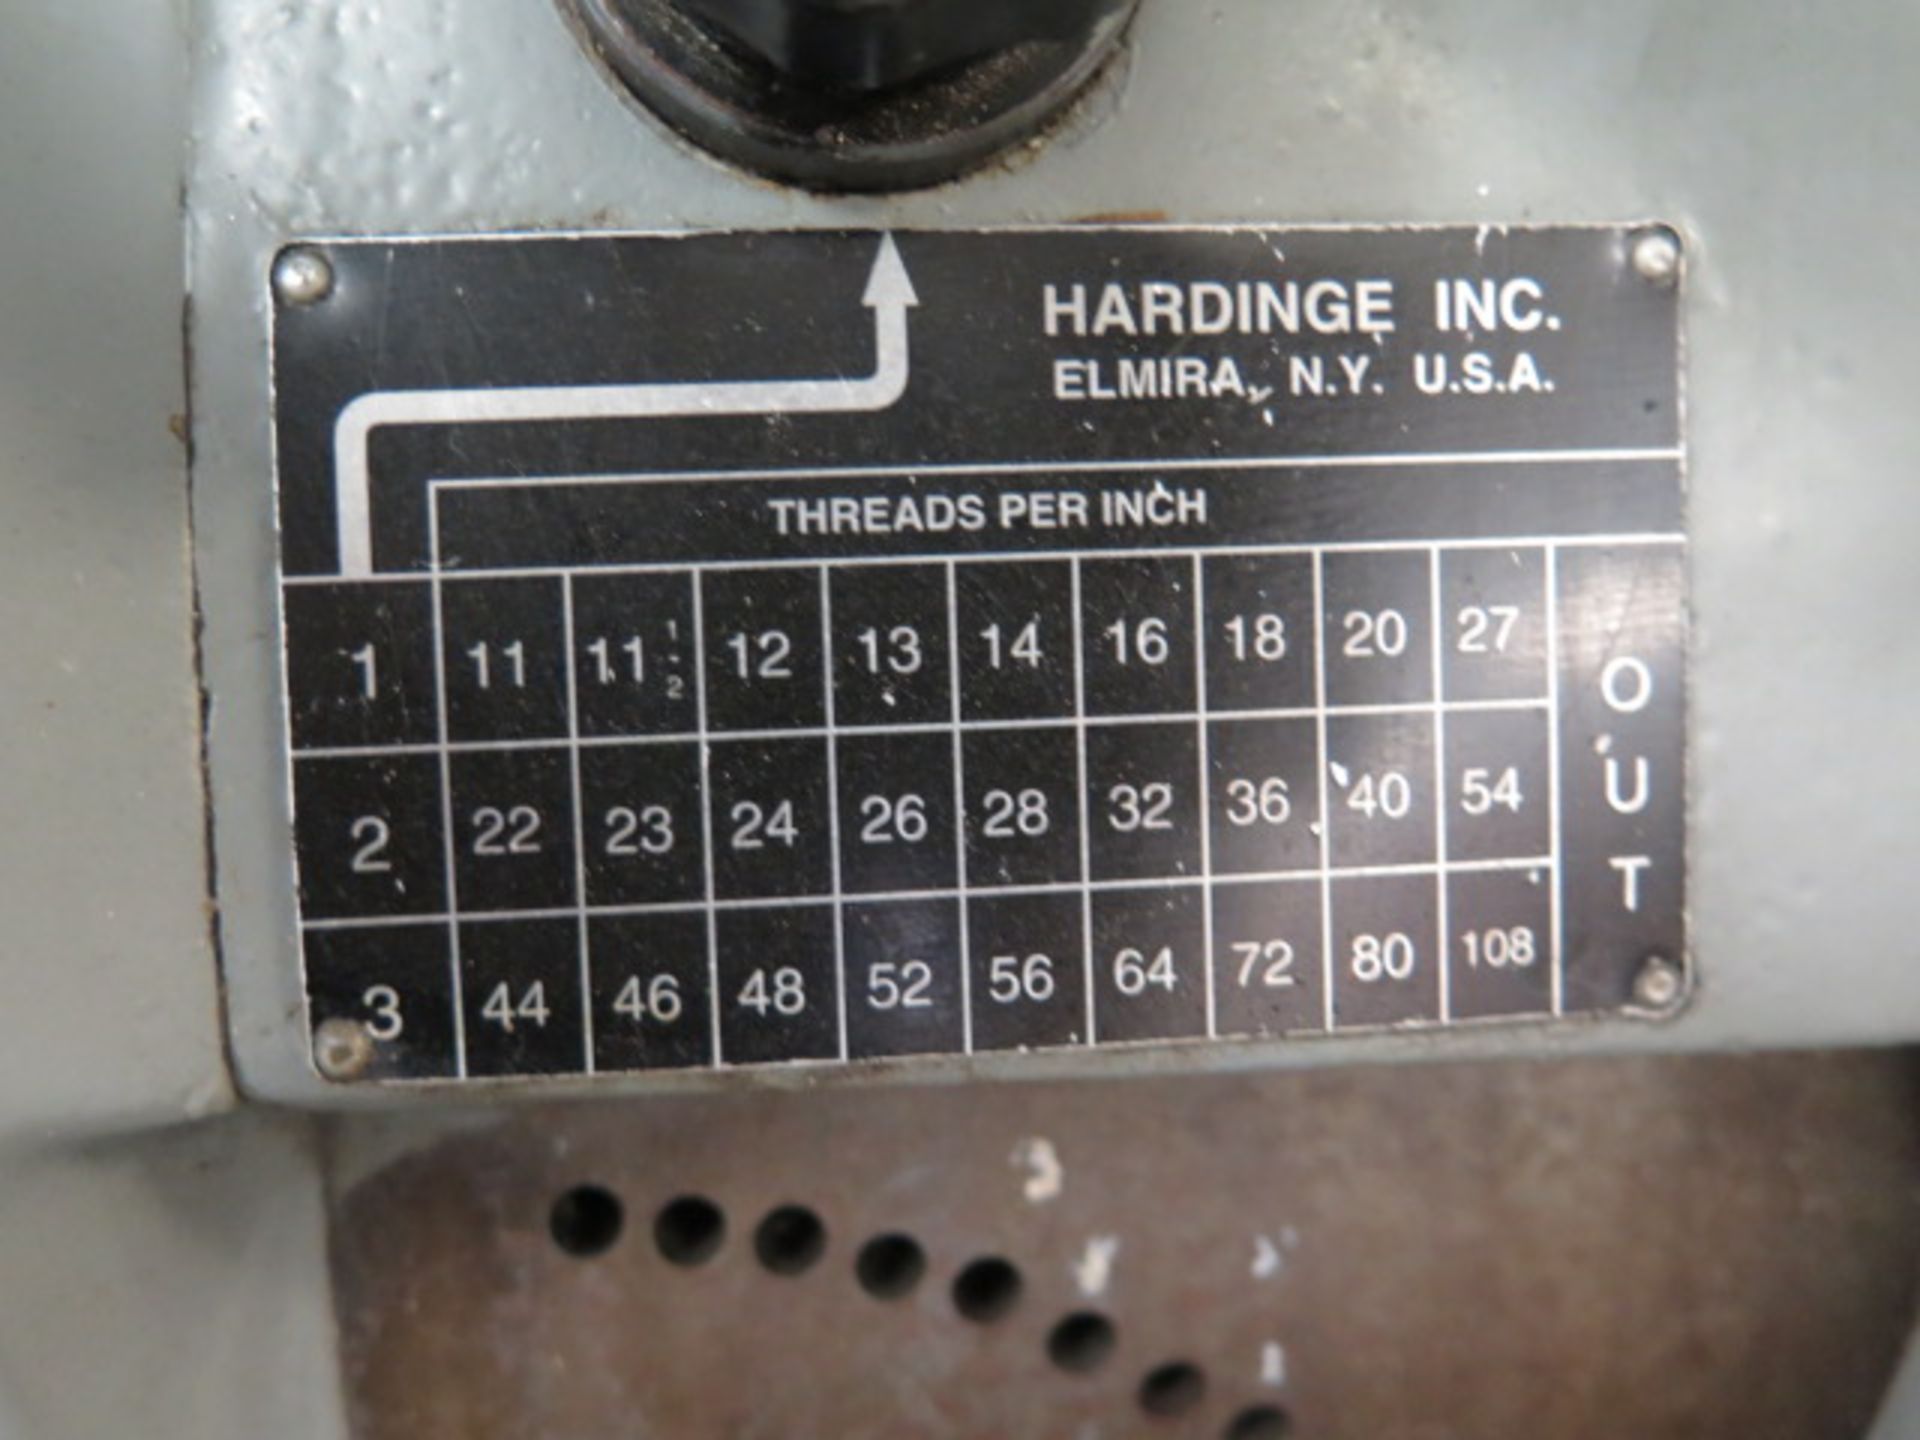 Hardinge HLV-H Wide Bed Tool Room Lathe s/n HLV-H-7583-T w/ Sony LH52 Programmable DRO, SOLD AS IS - Image 8 of 15